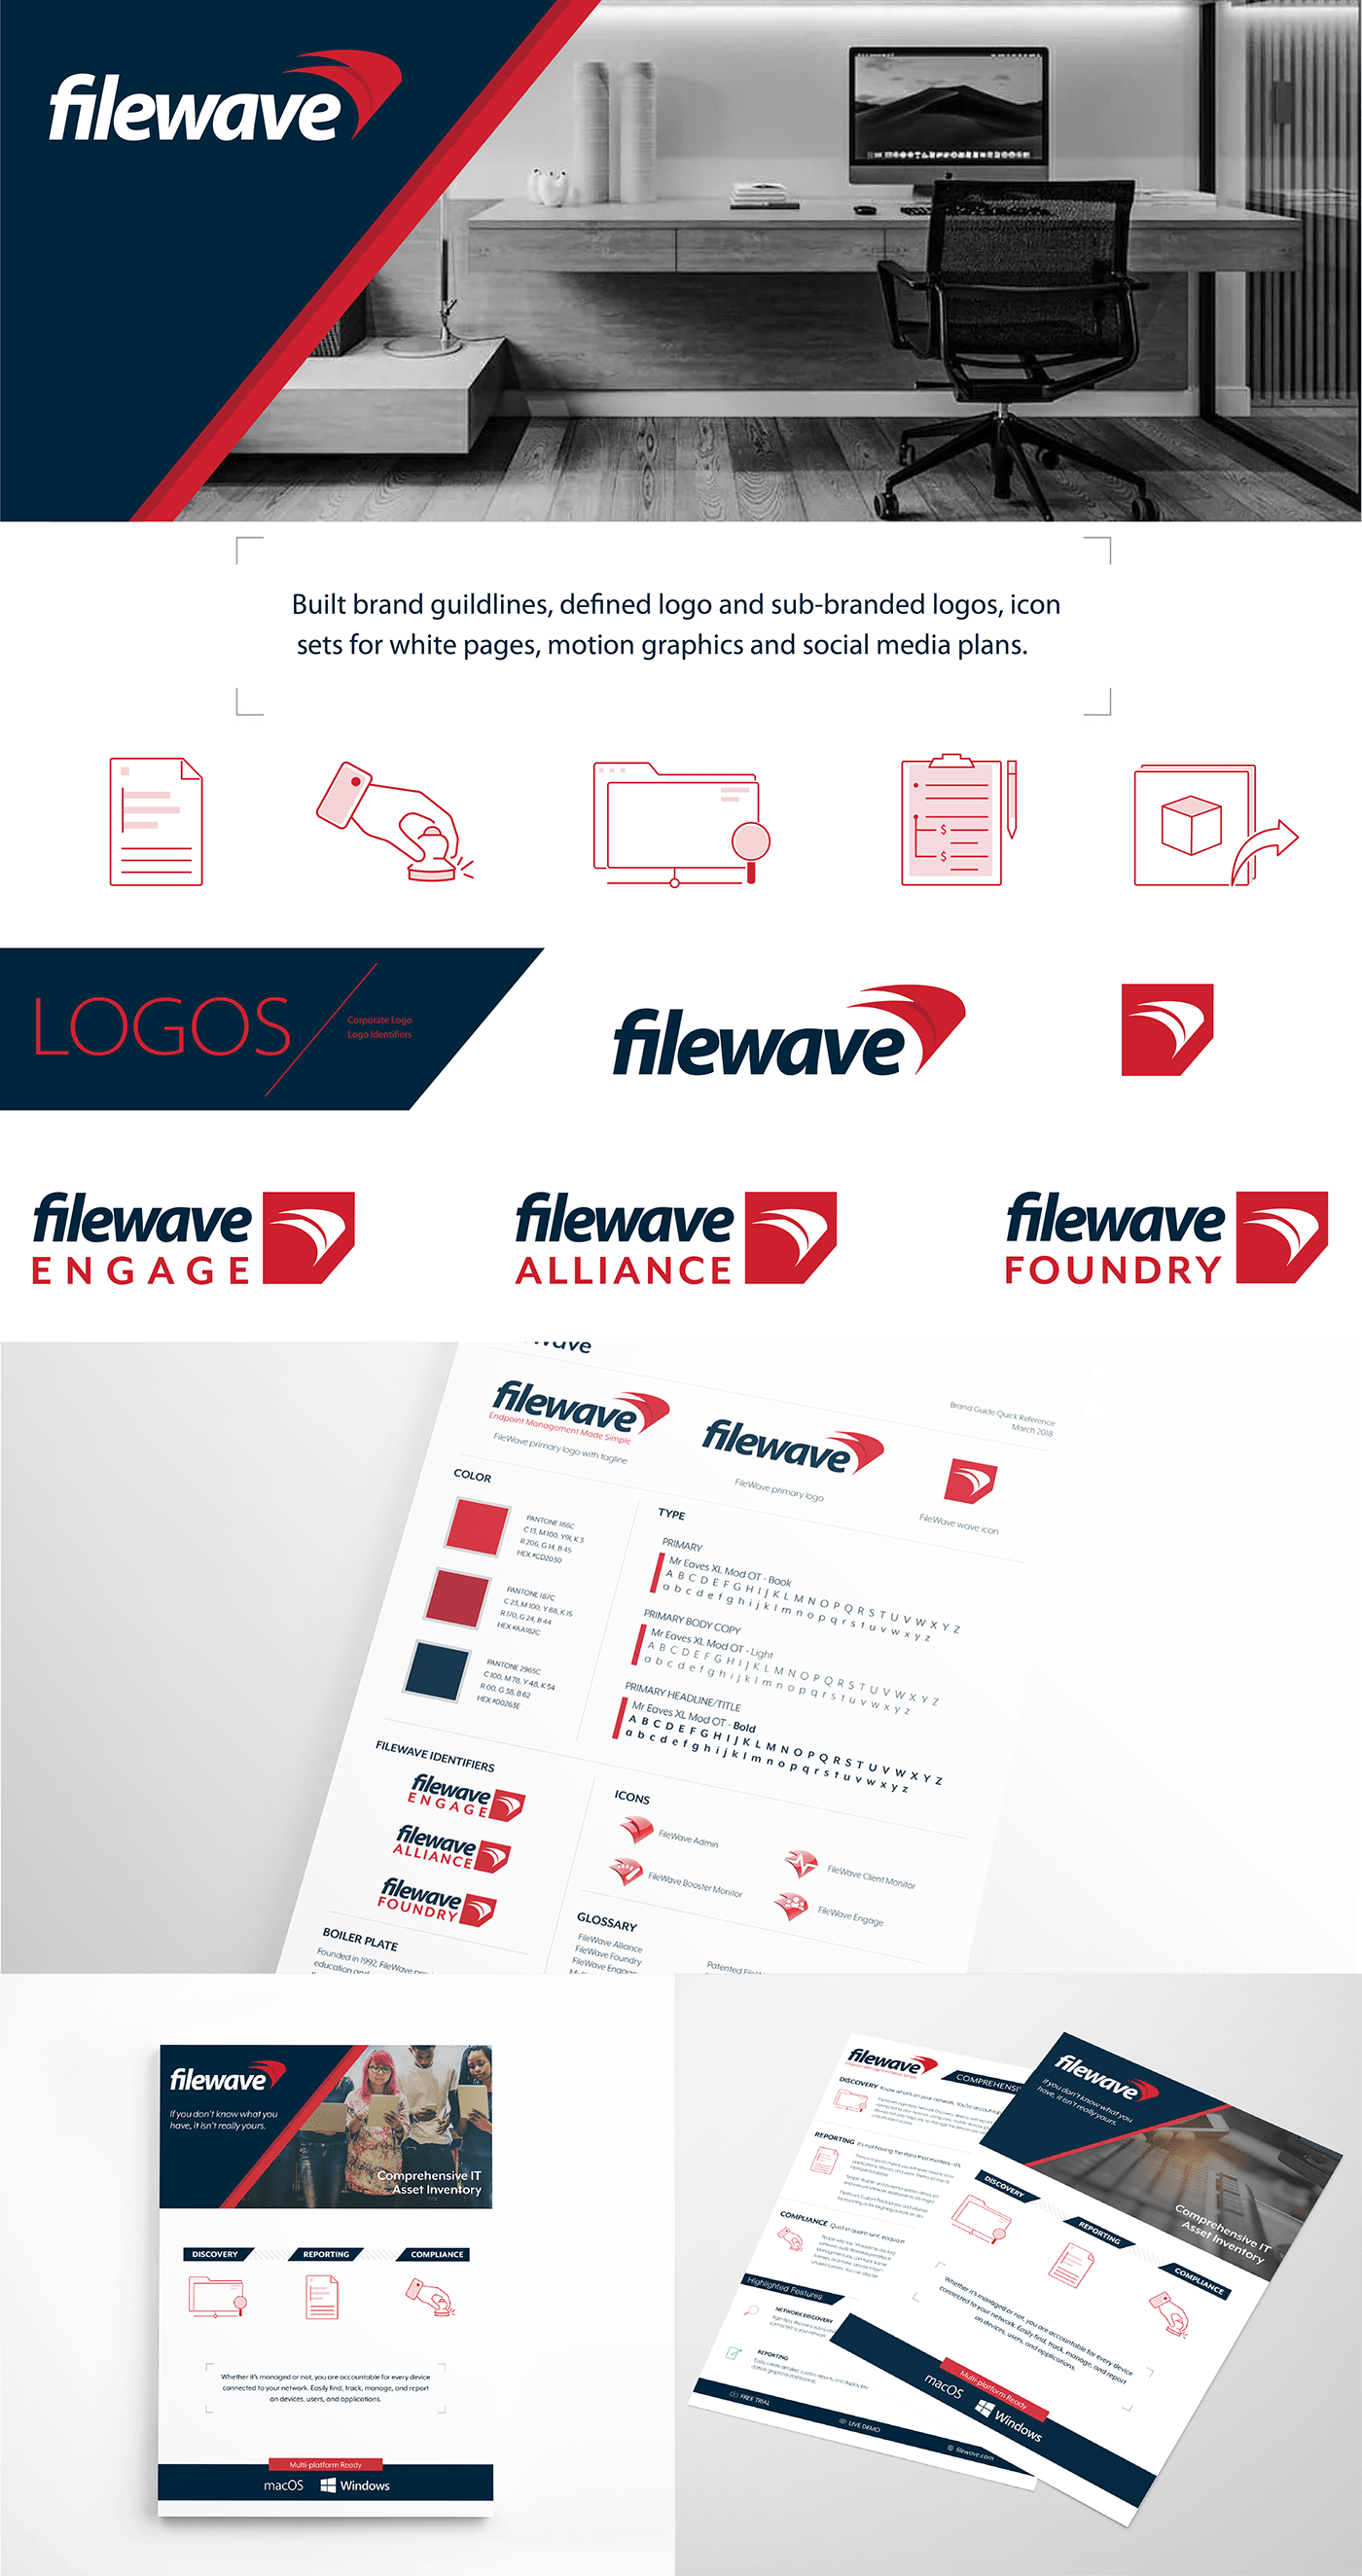 branding guide Reference Guide Brand style white paper blue red filewave